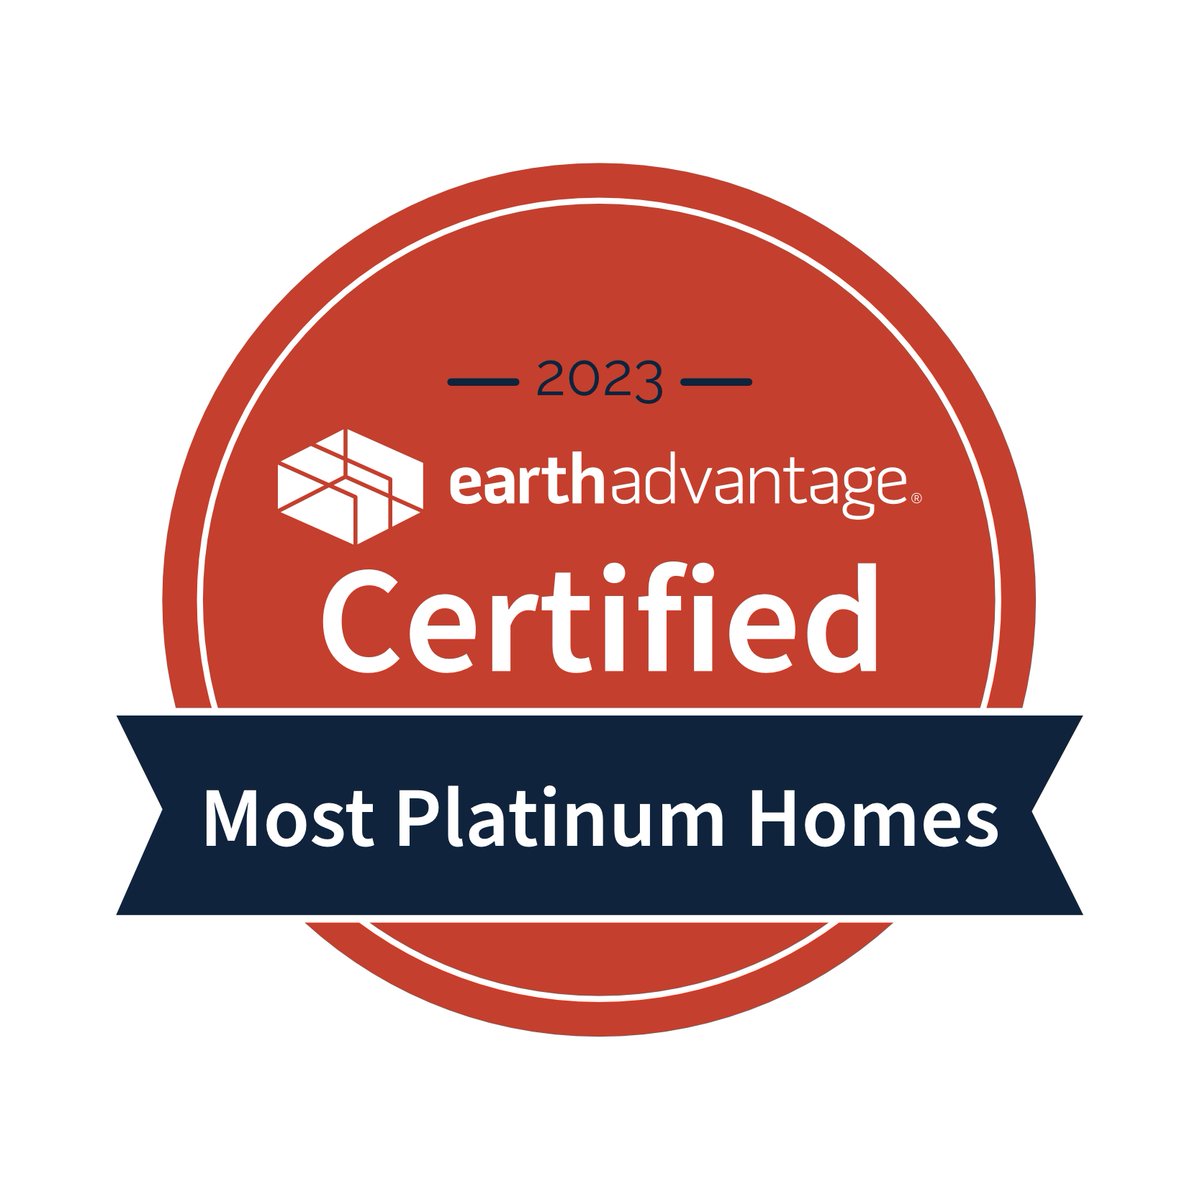 Did you know that ICHIJO is Earth Advantage® Certified MOST PLATINUM HOMES? Platinum is the highest level of energy efficiency! Save money while saving energy in your new home. Learn all about the ICHIJO Advantage: ichijousa.com